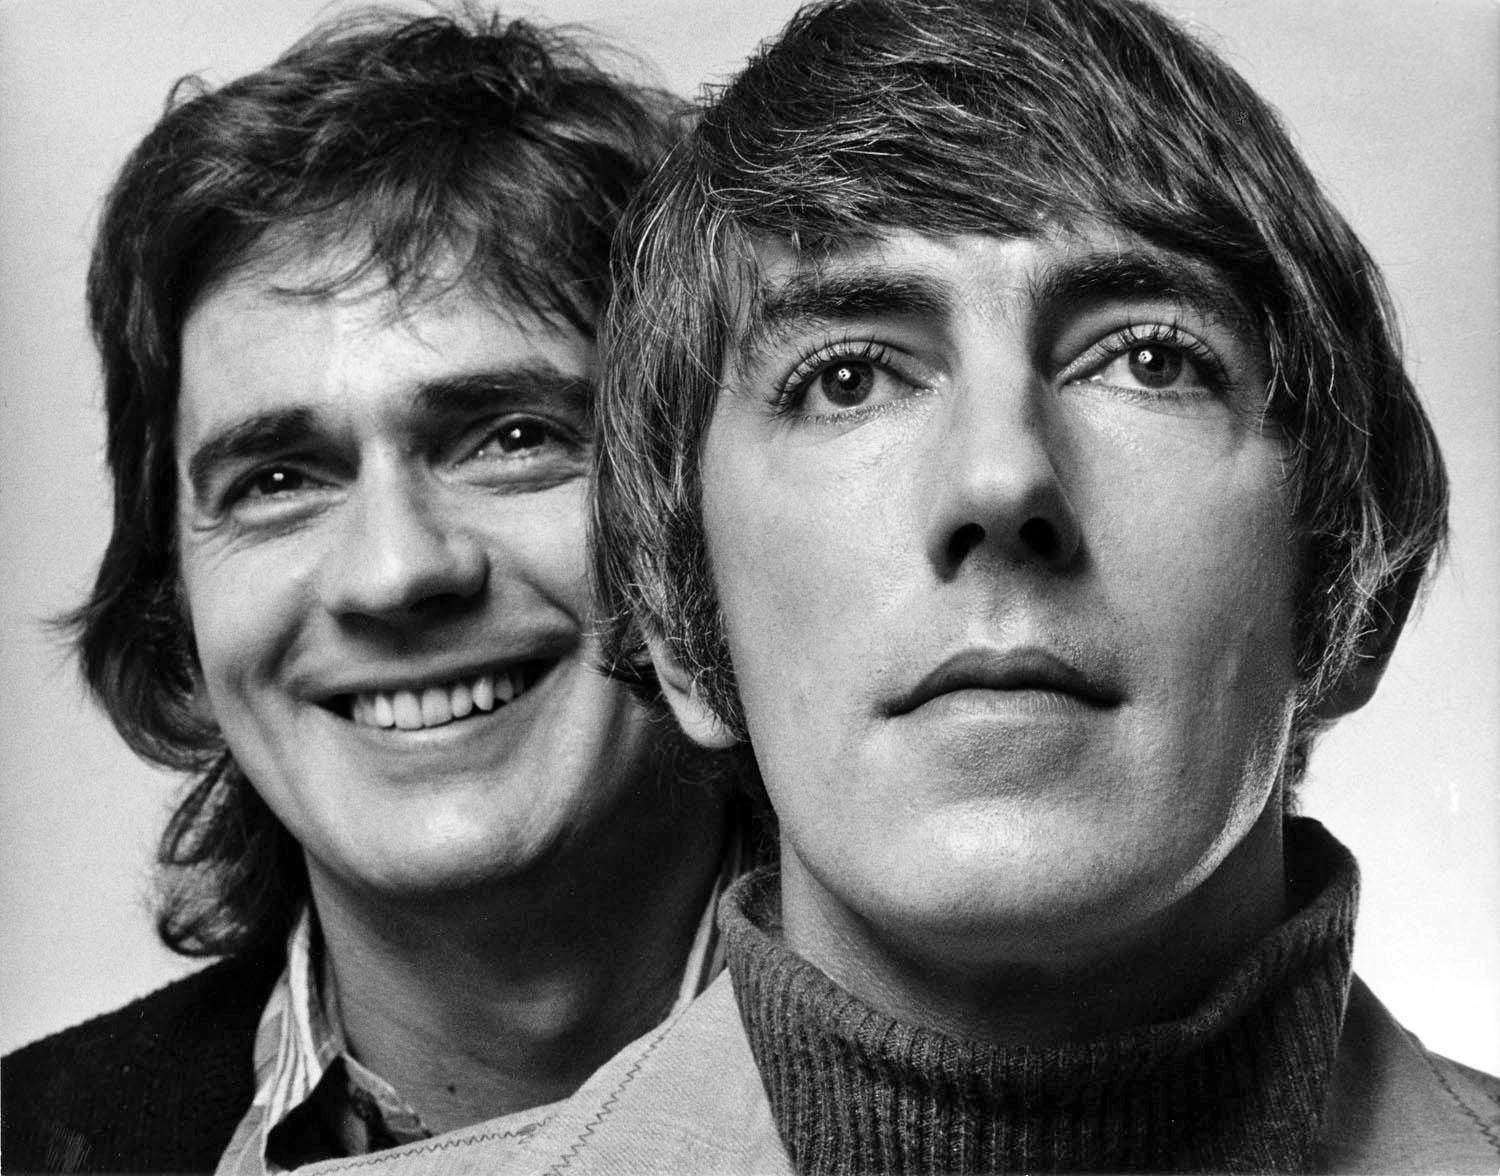 British Comedy Team Dudley Moore and Peter Cook